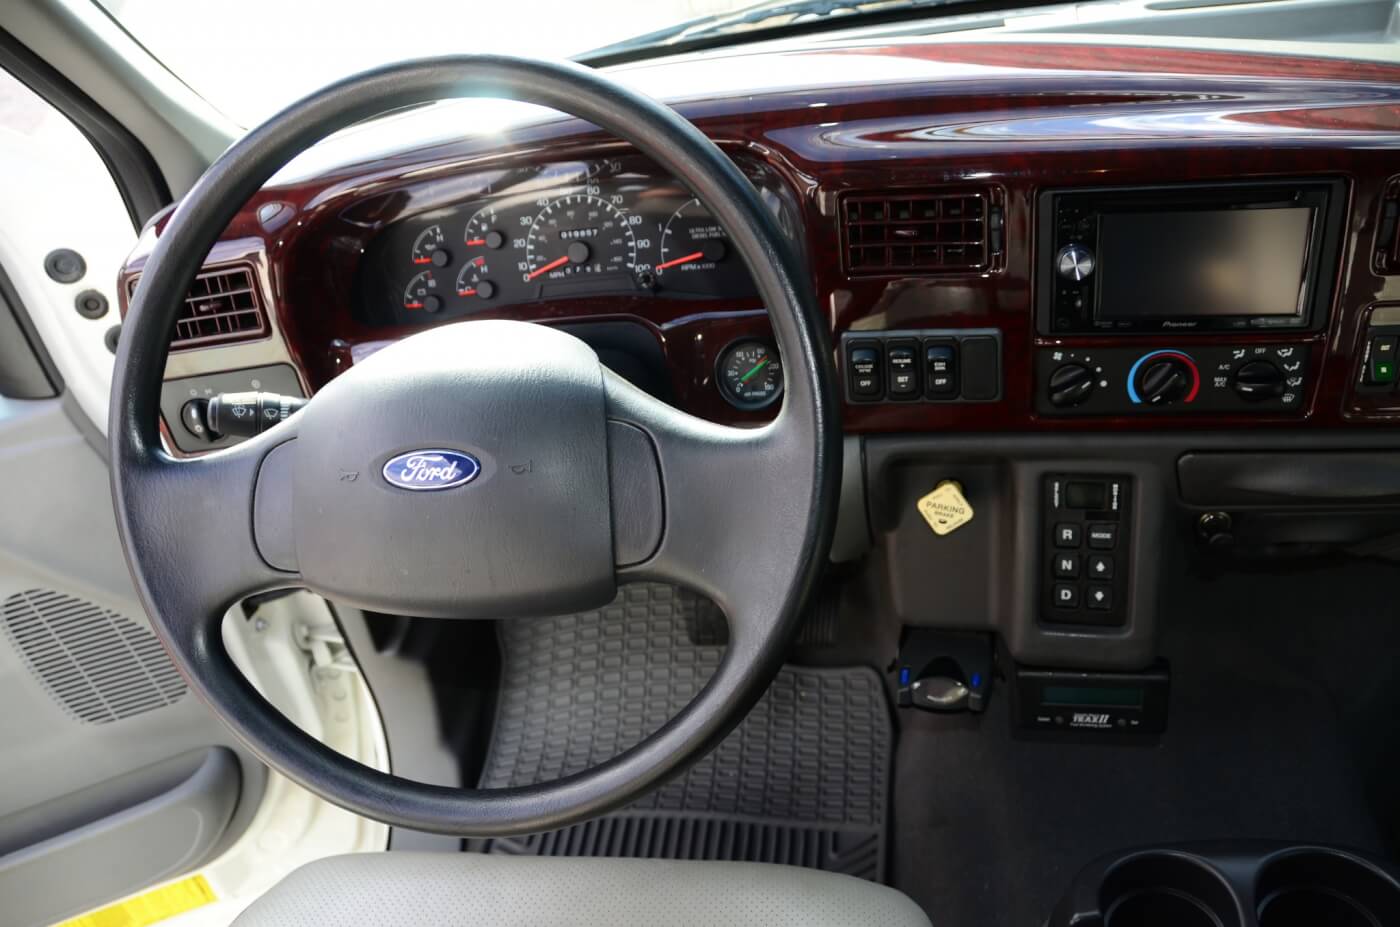 A wood-grain dash is not what you’d expect in a utility rig.